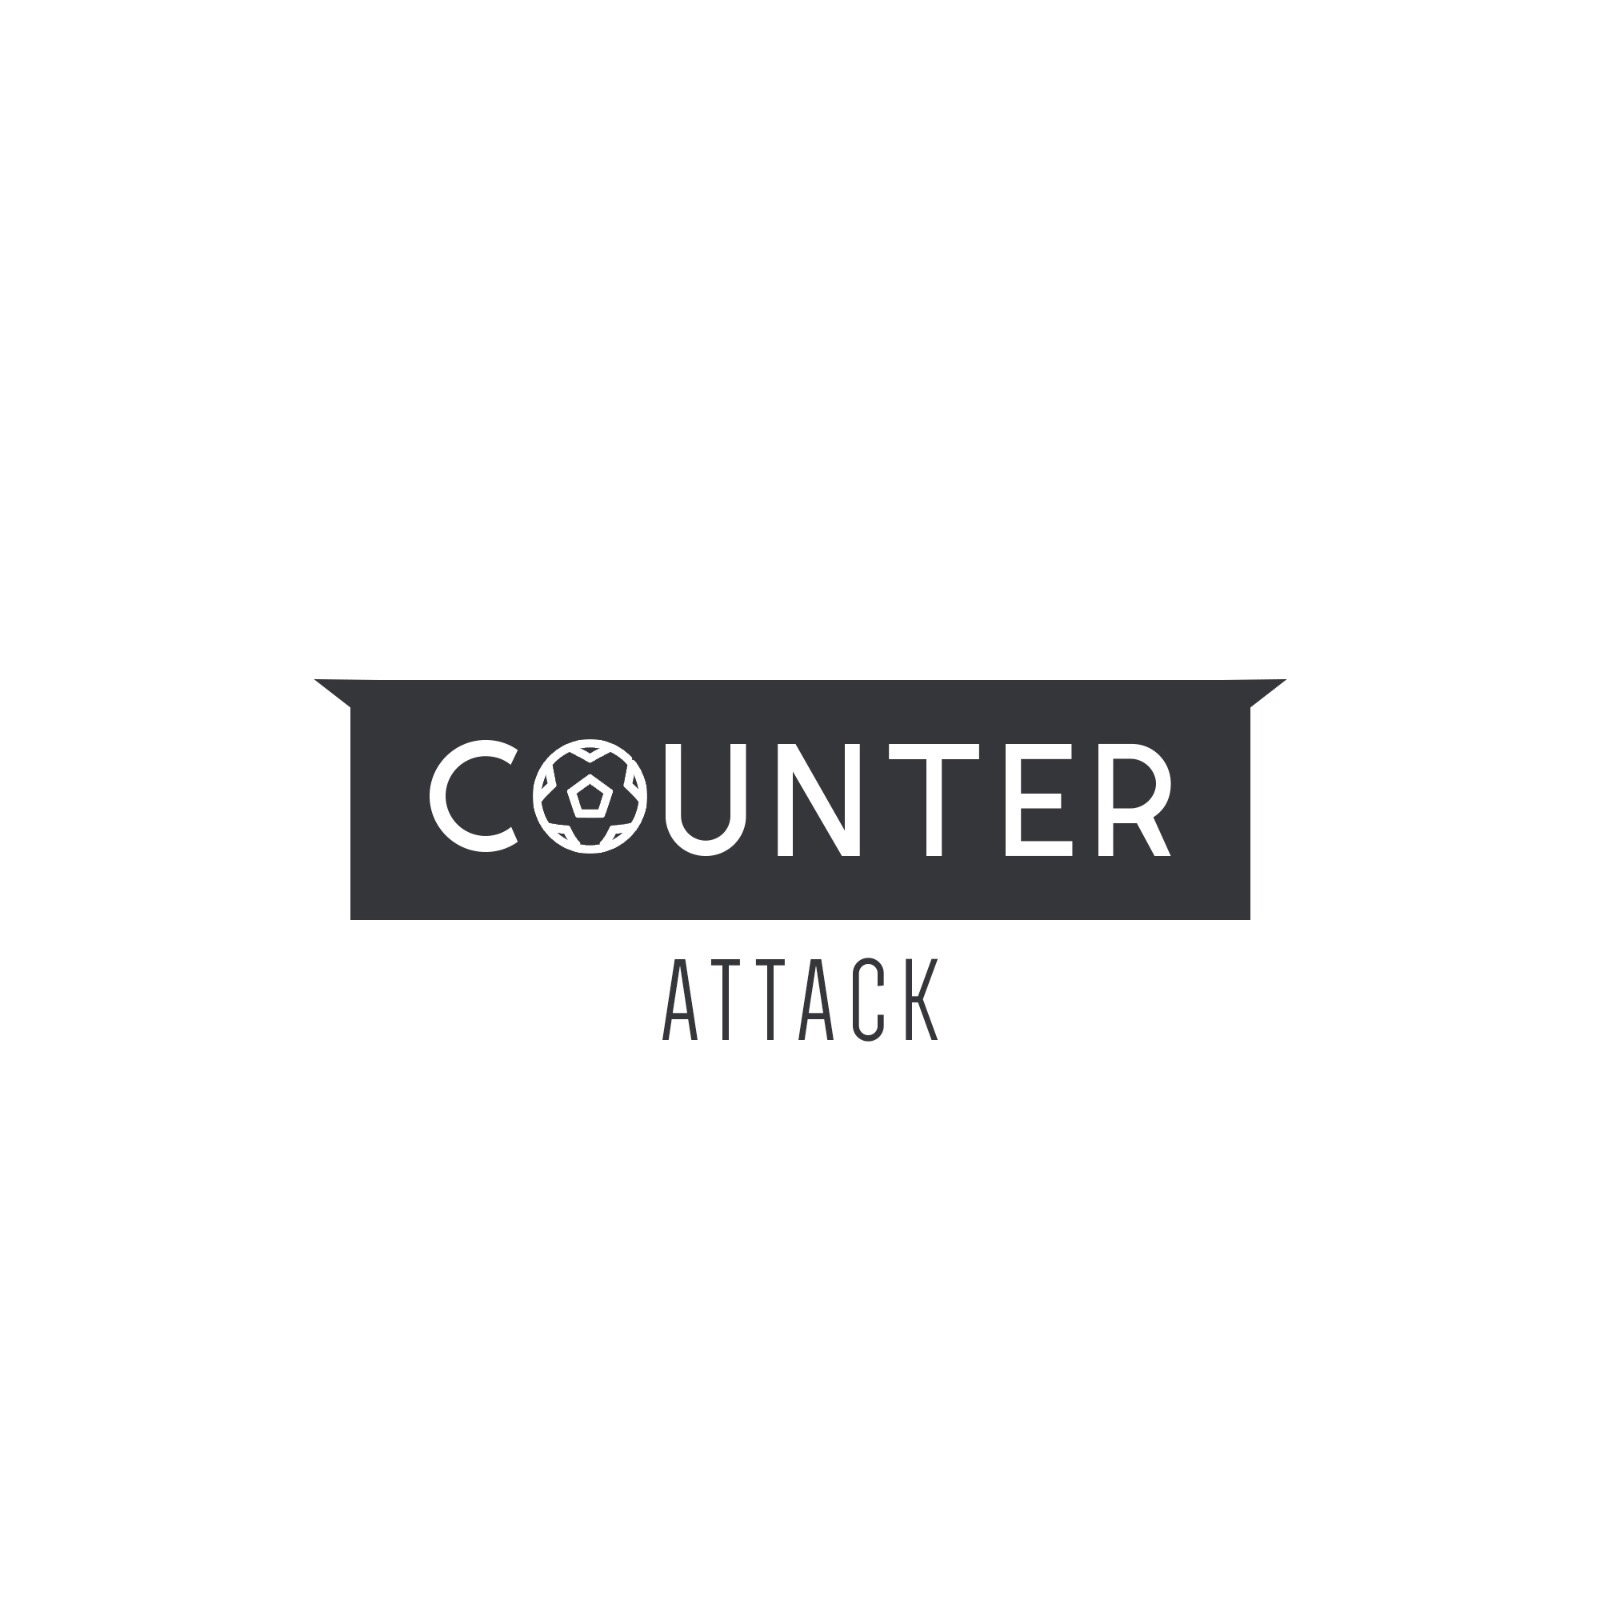 Counter Attack - Episode 38 - Mour problems for Man Utd